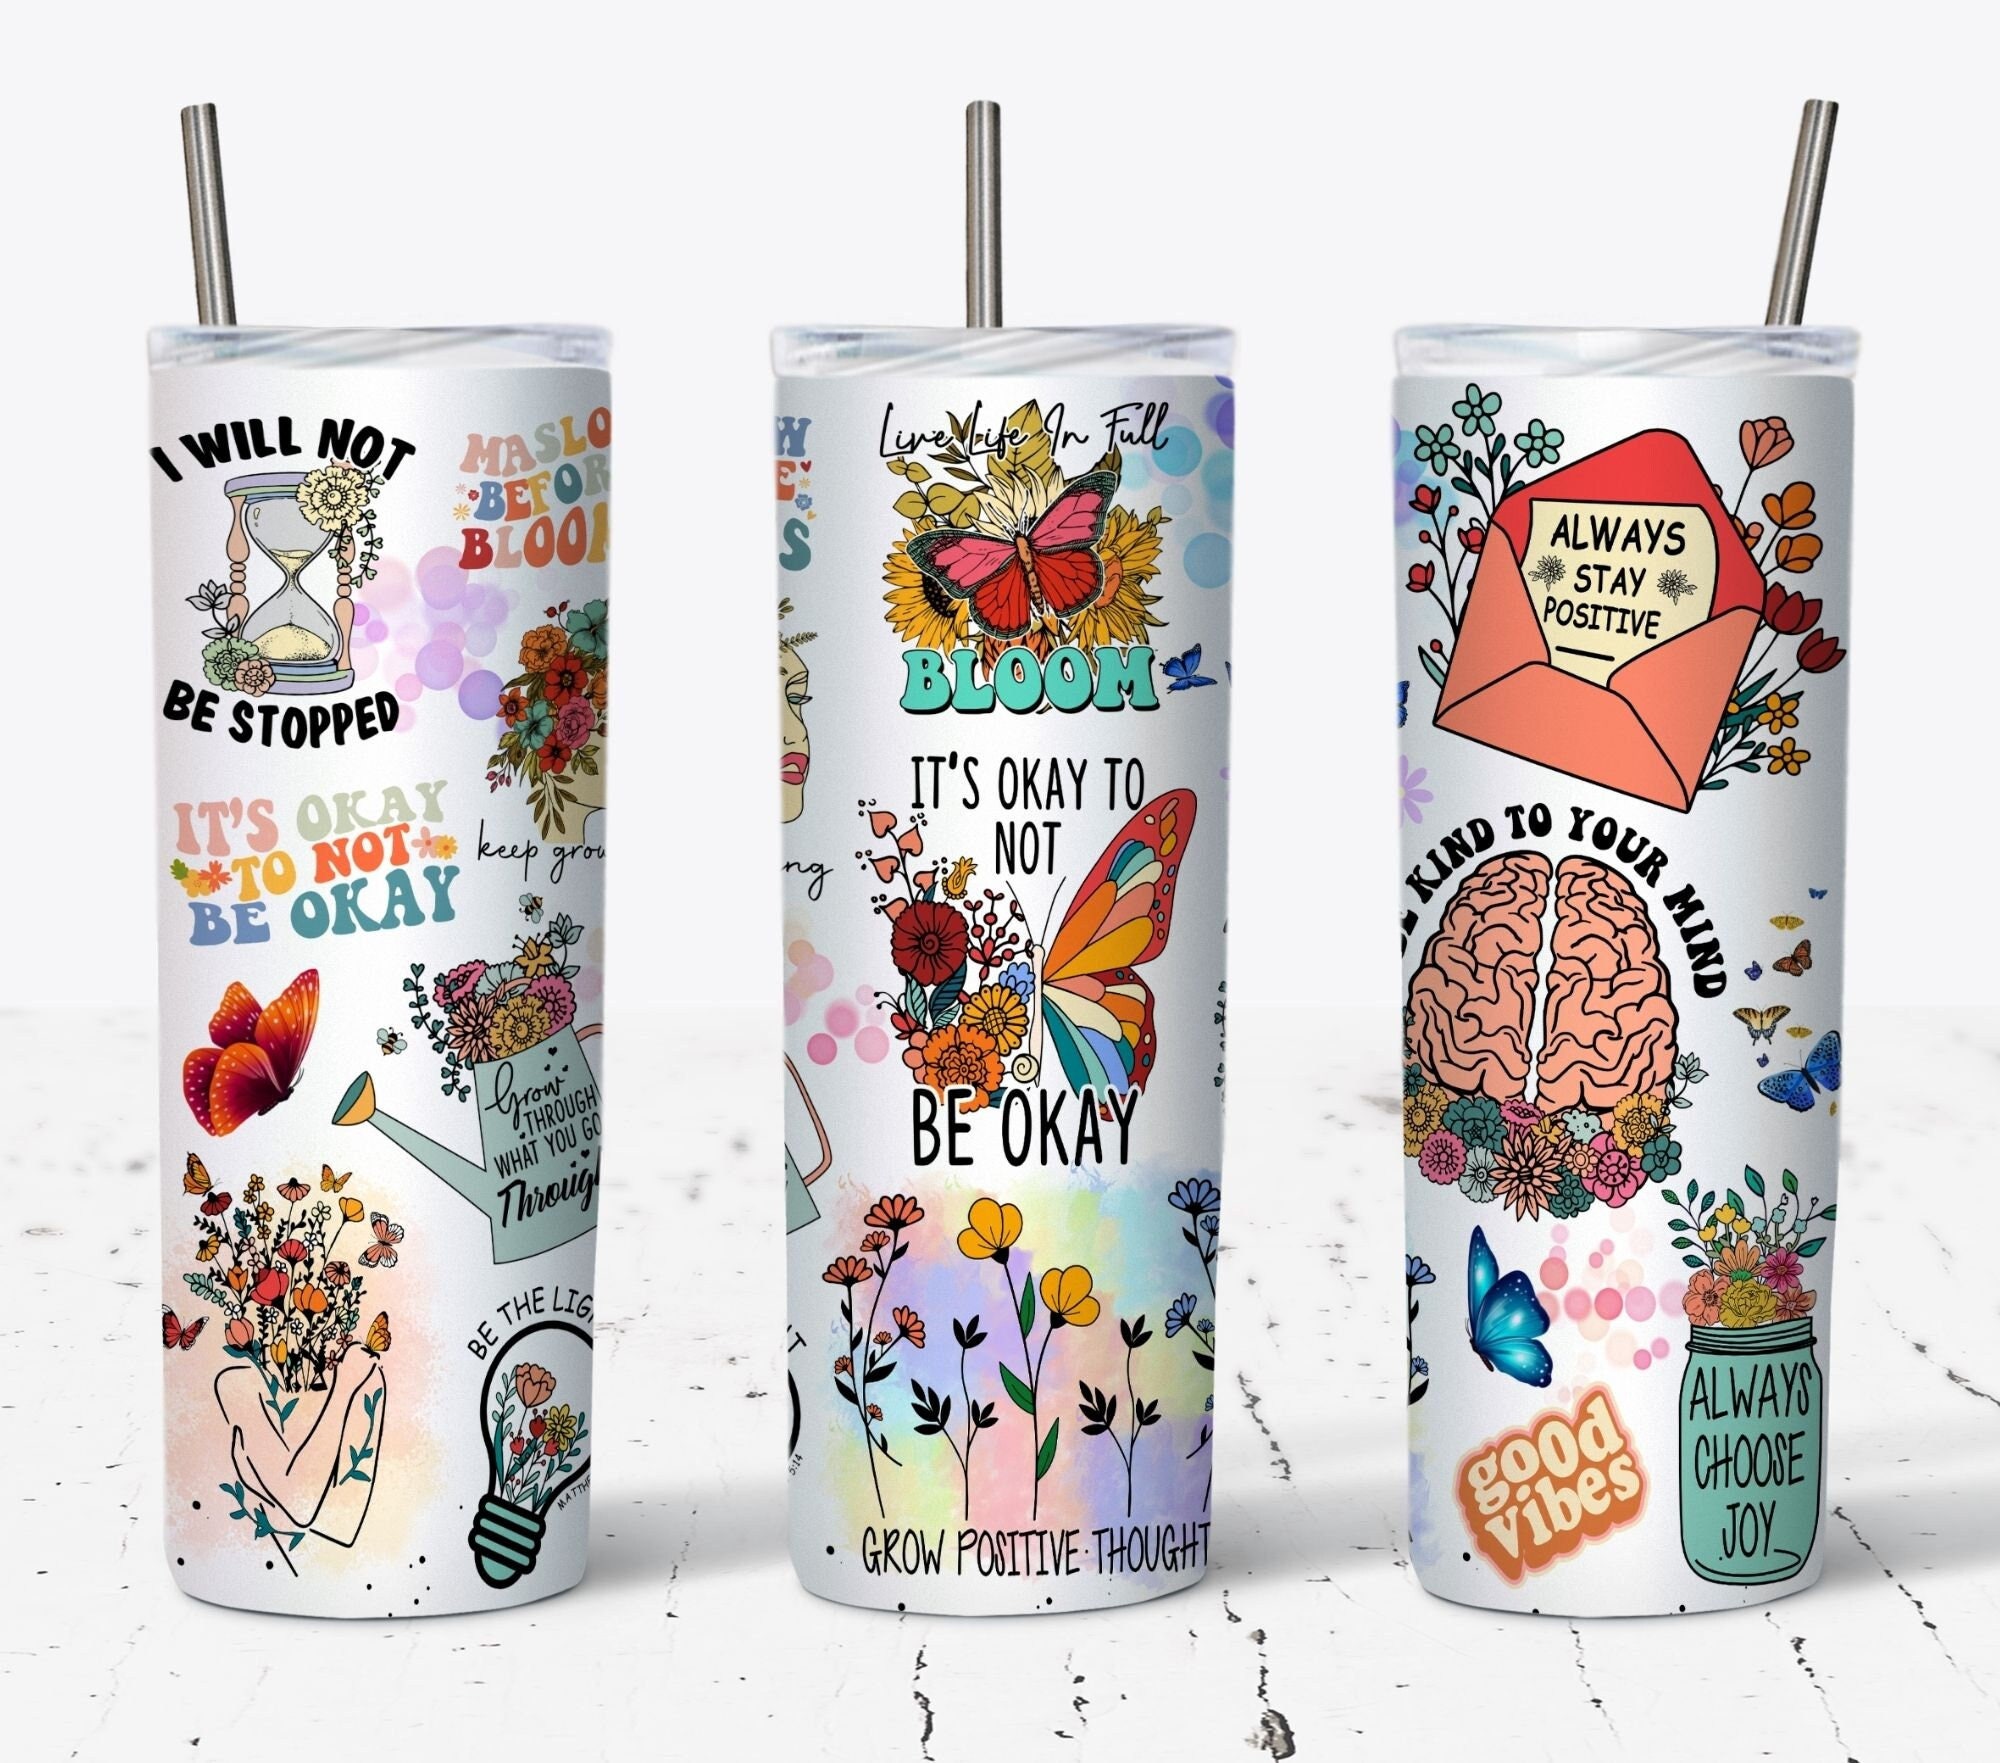 Shrink Wrap (100 pack) for 20 and 30oz Straight Sublimation Tumblers –  SSUPhoto Designs